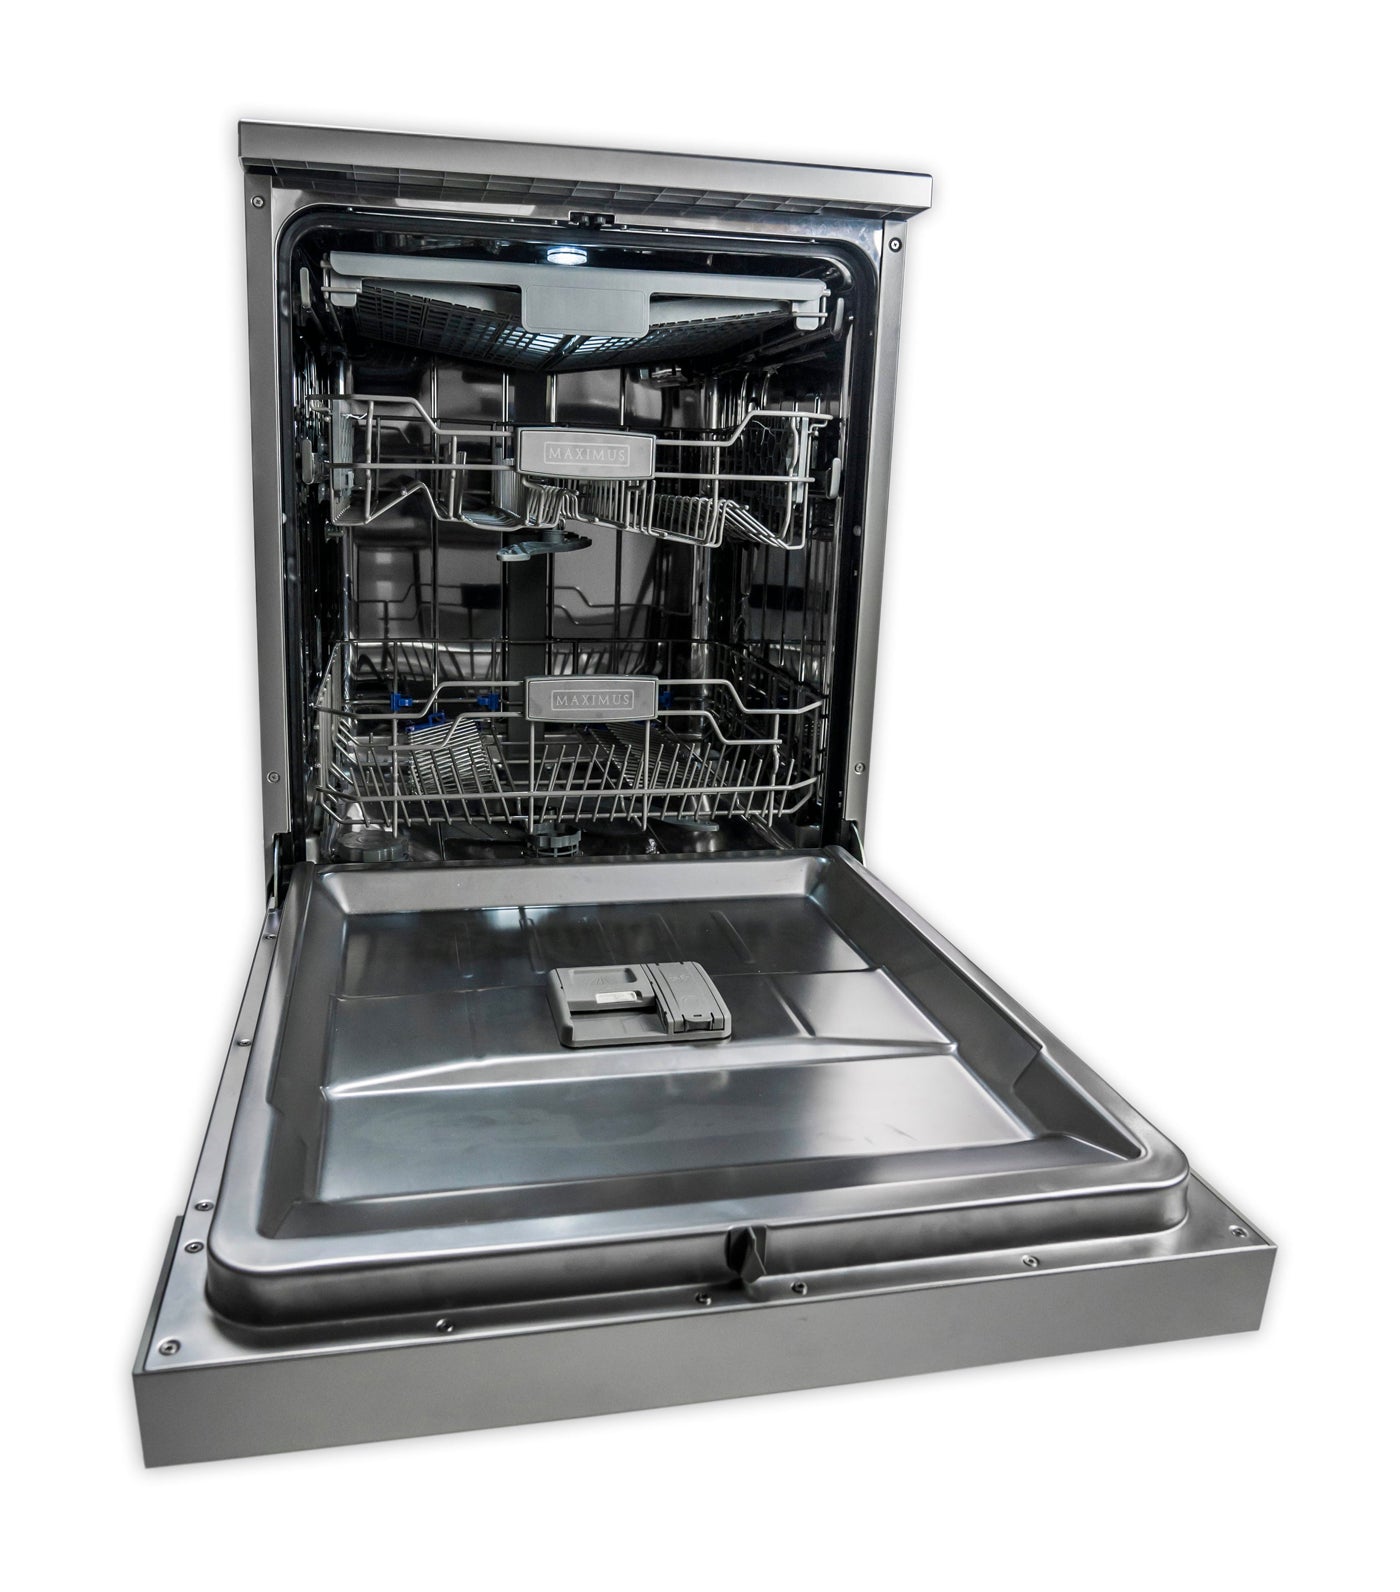 Maximus MAX-D003S Freestanding Dishwasher - Stainless Steel 